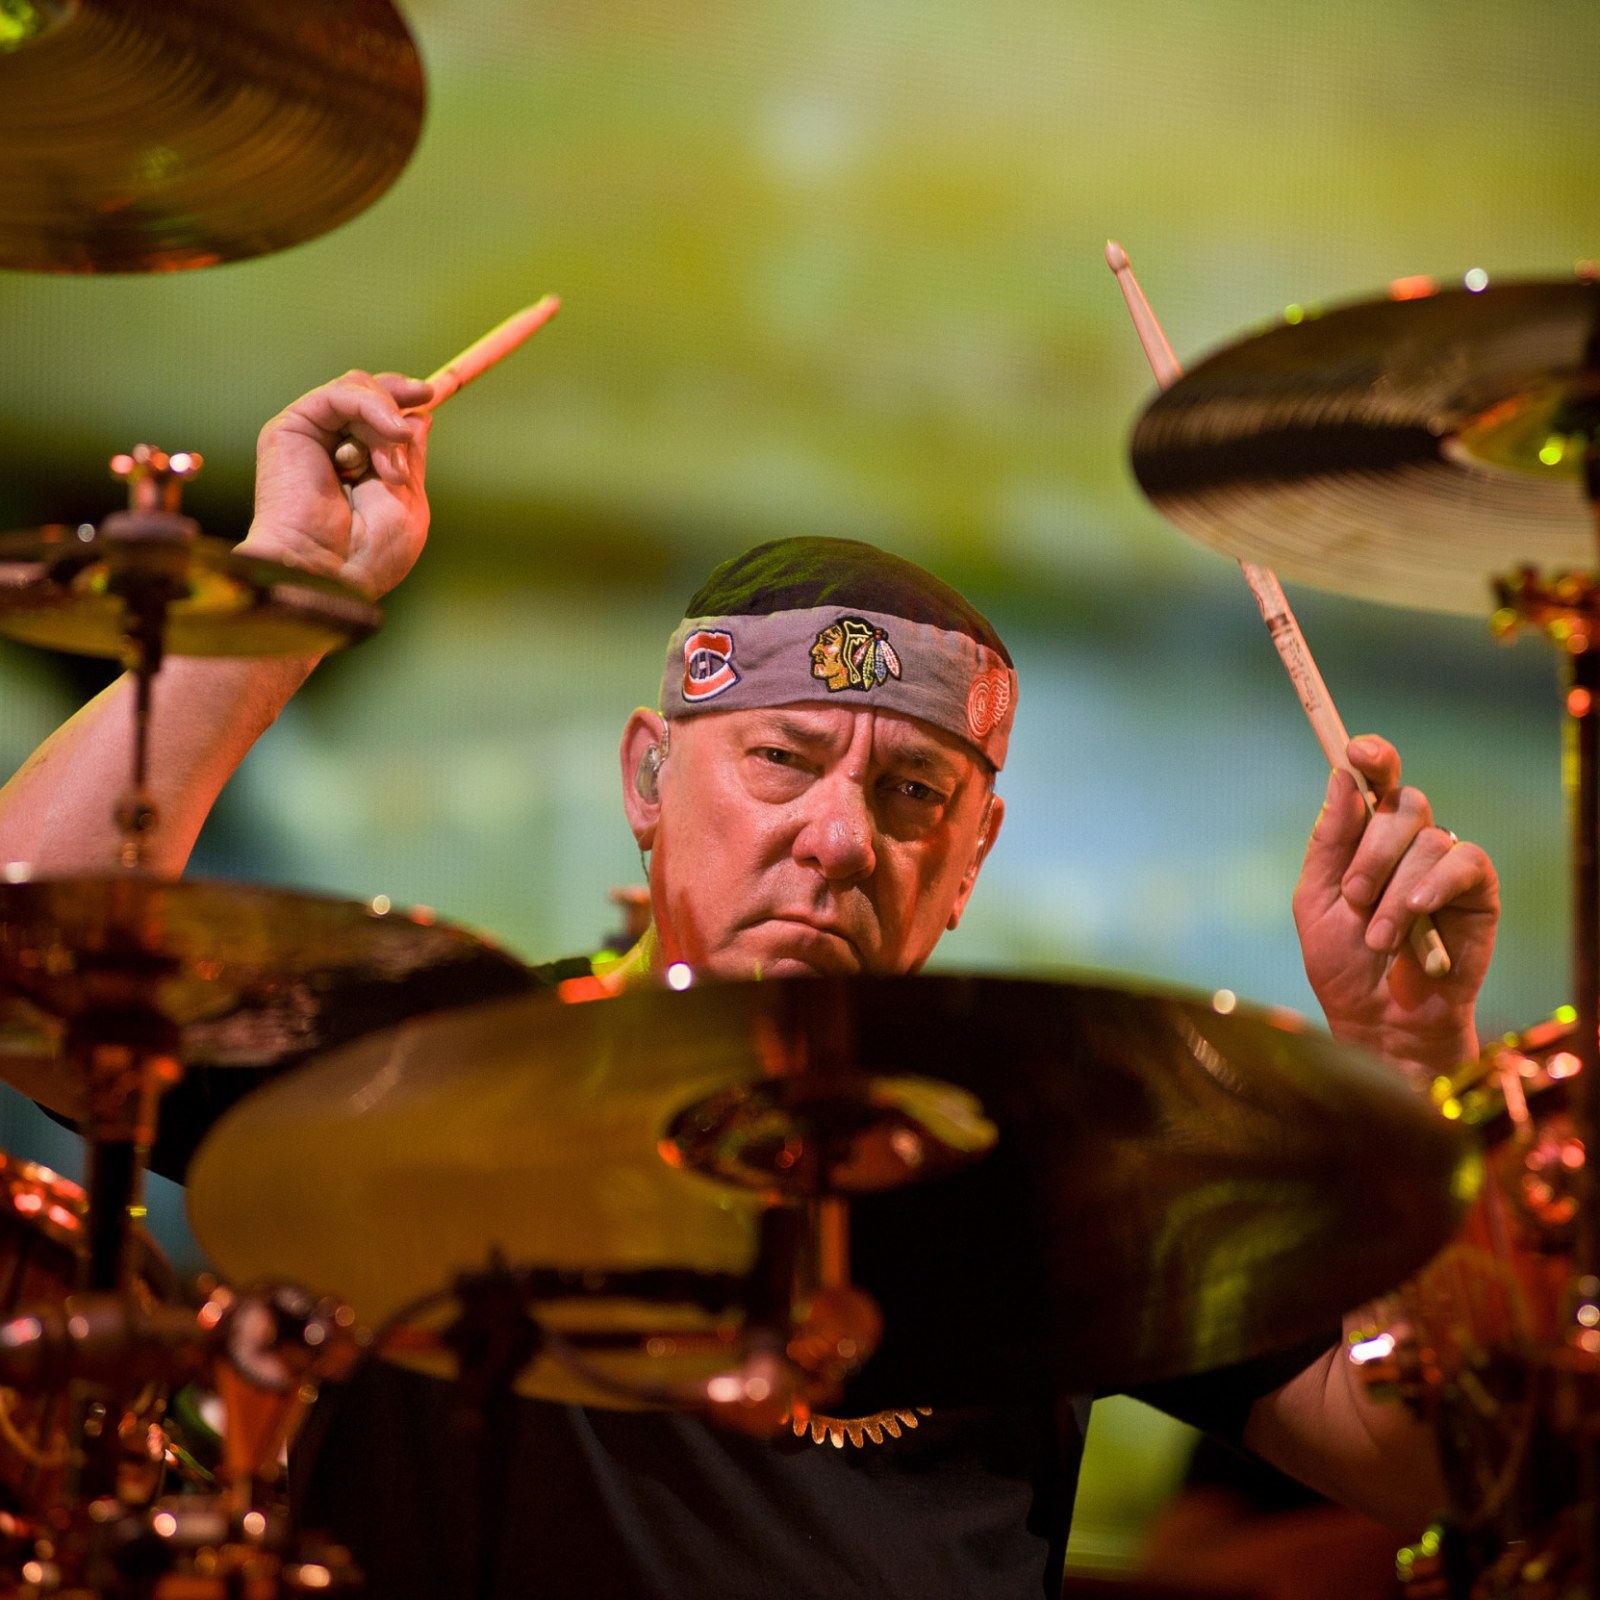 Rush's surviving members say the band is over after Neil Peart's death